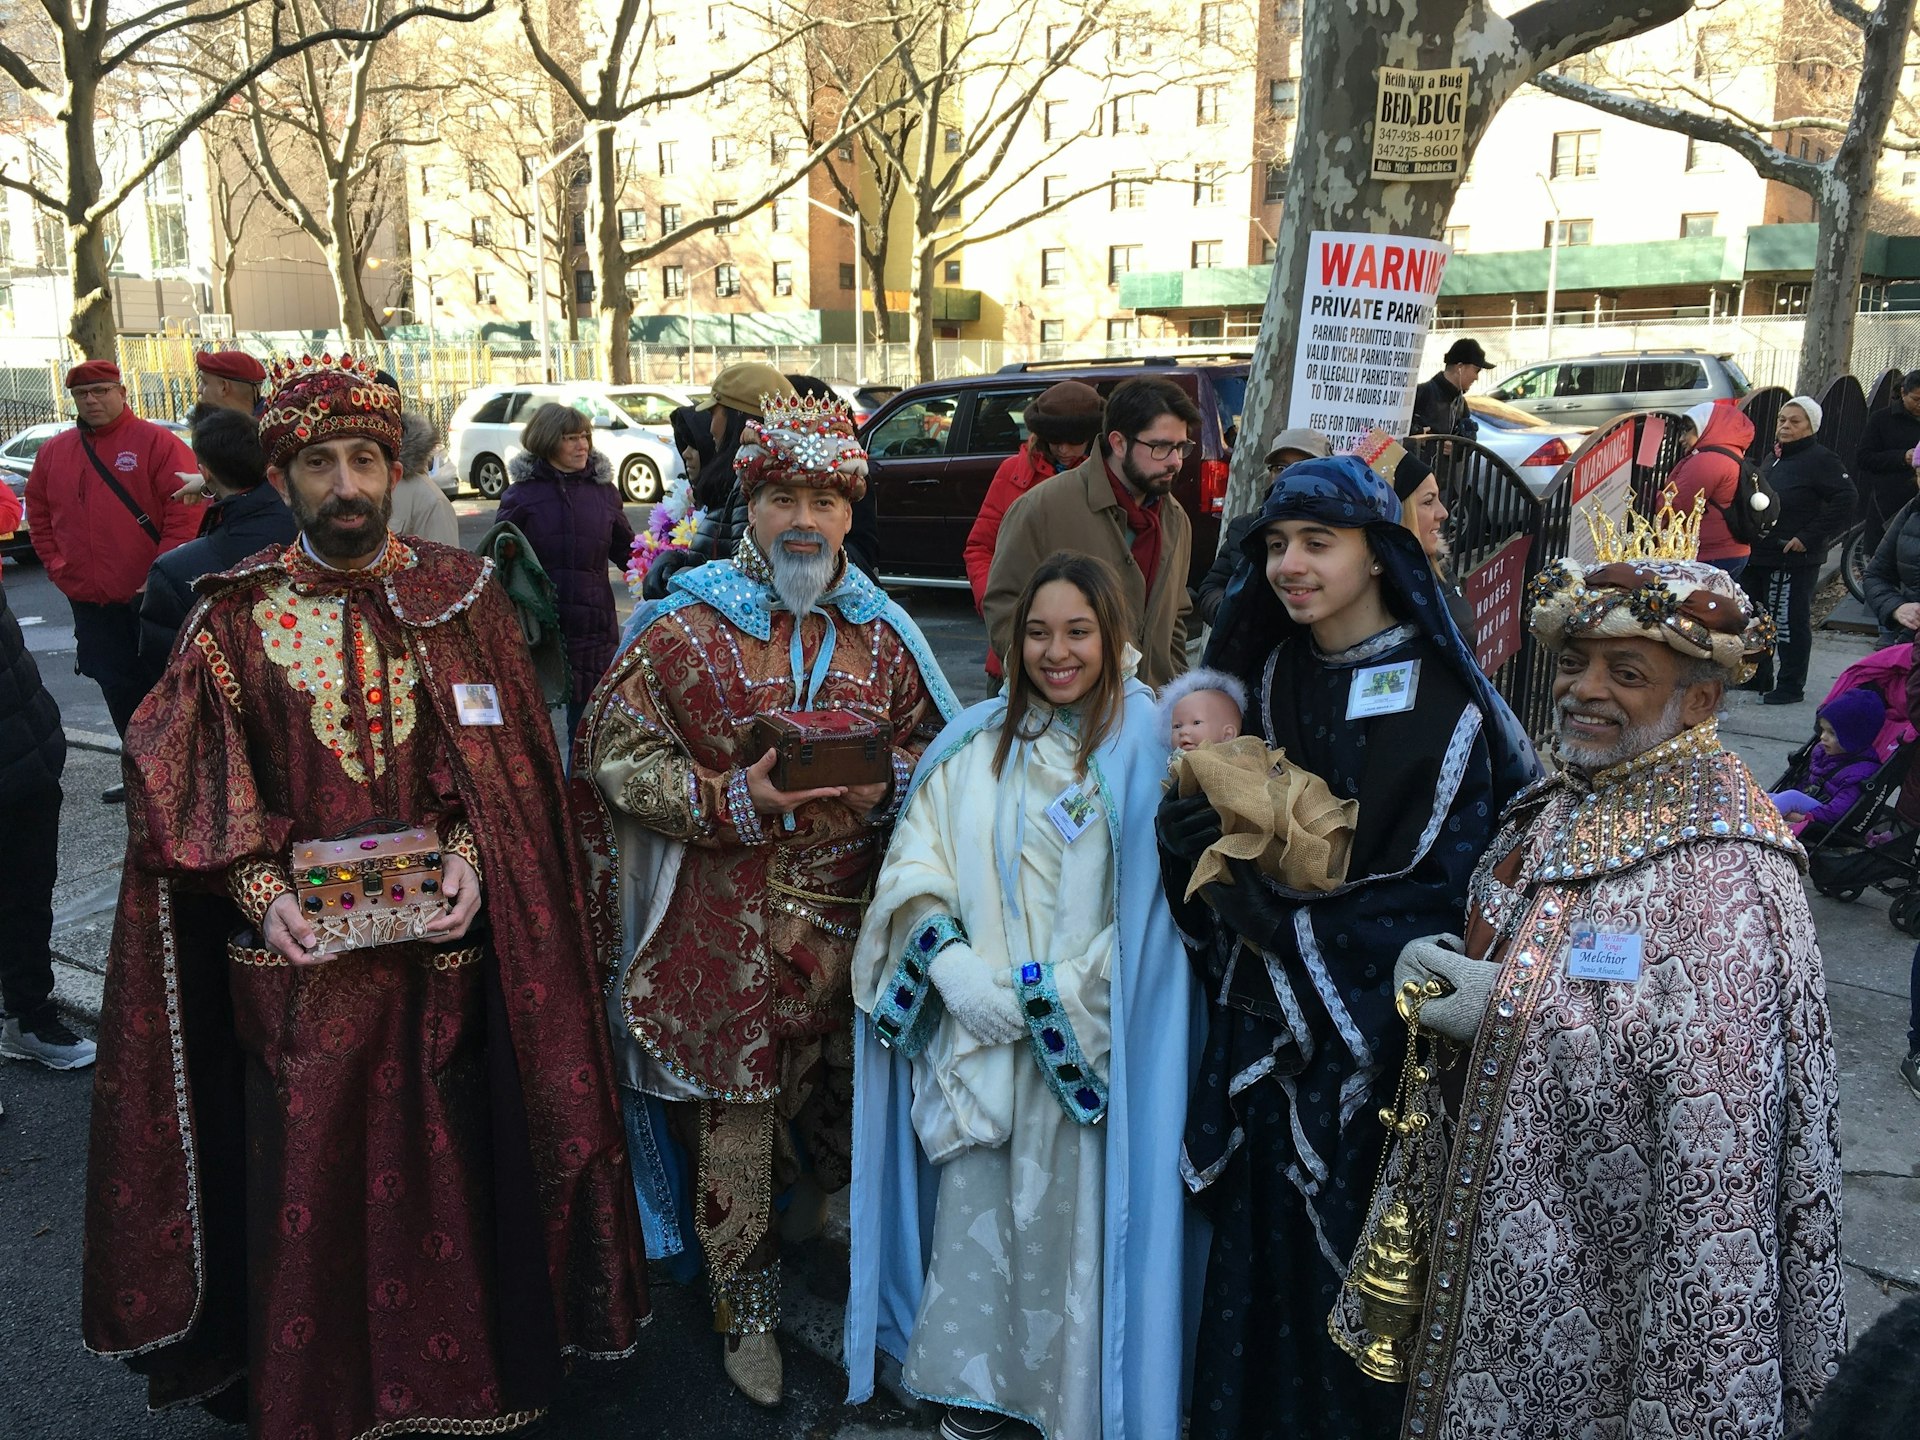 People dressed up in costumes at the Three Kings Day parade in East Harlem, New York City, New York, USA